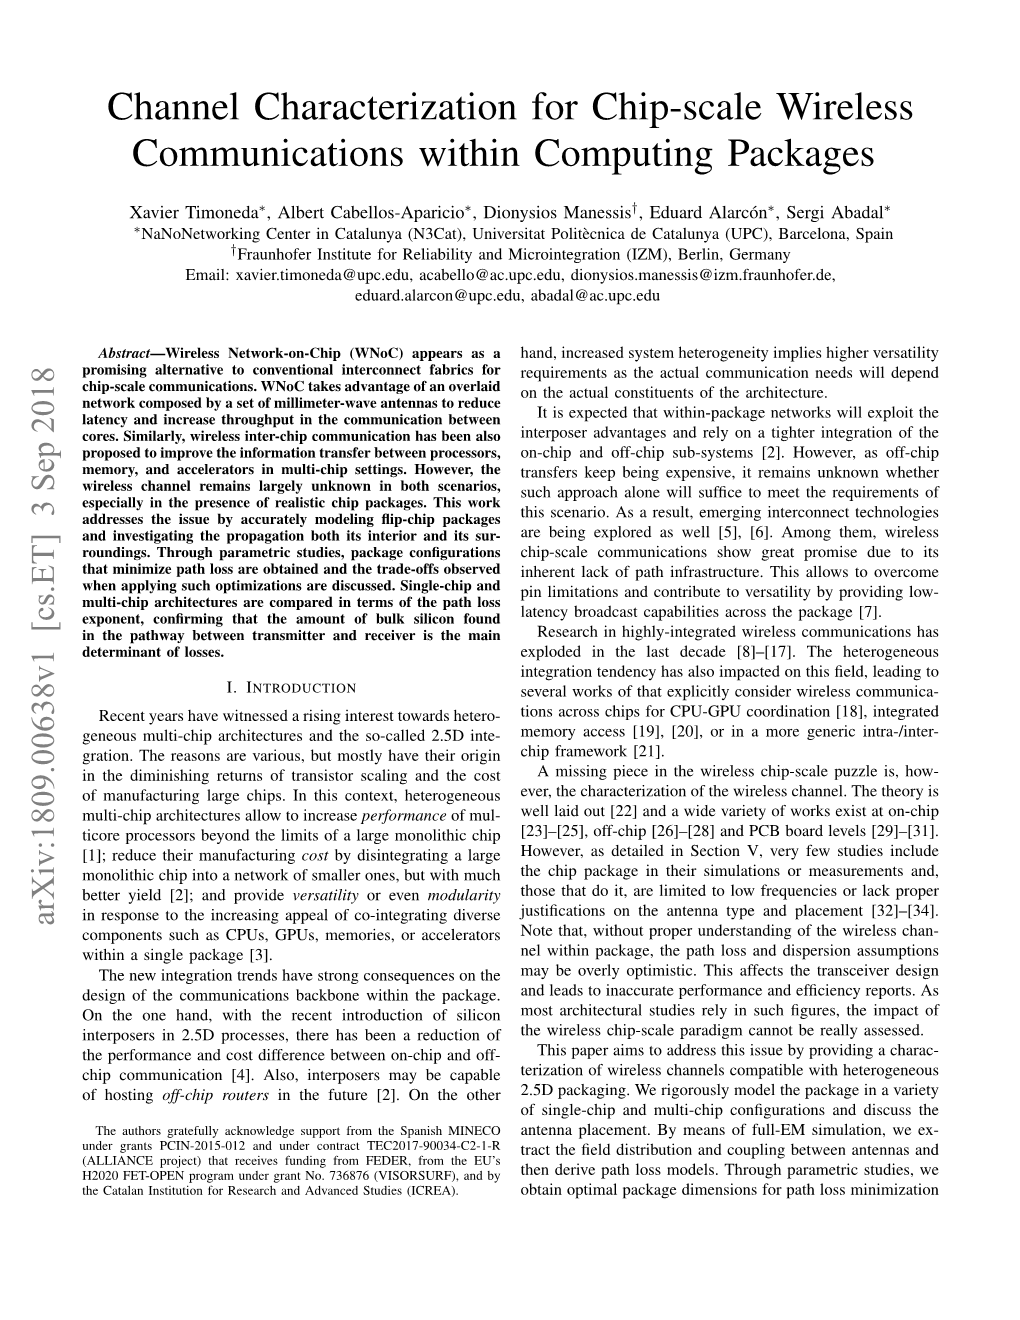 Channel Characterization for Chip-Scale Wireless Communications Within Computing Packages